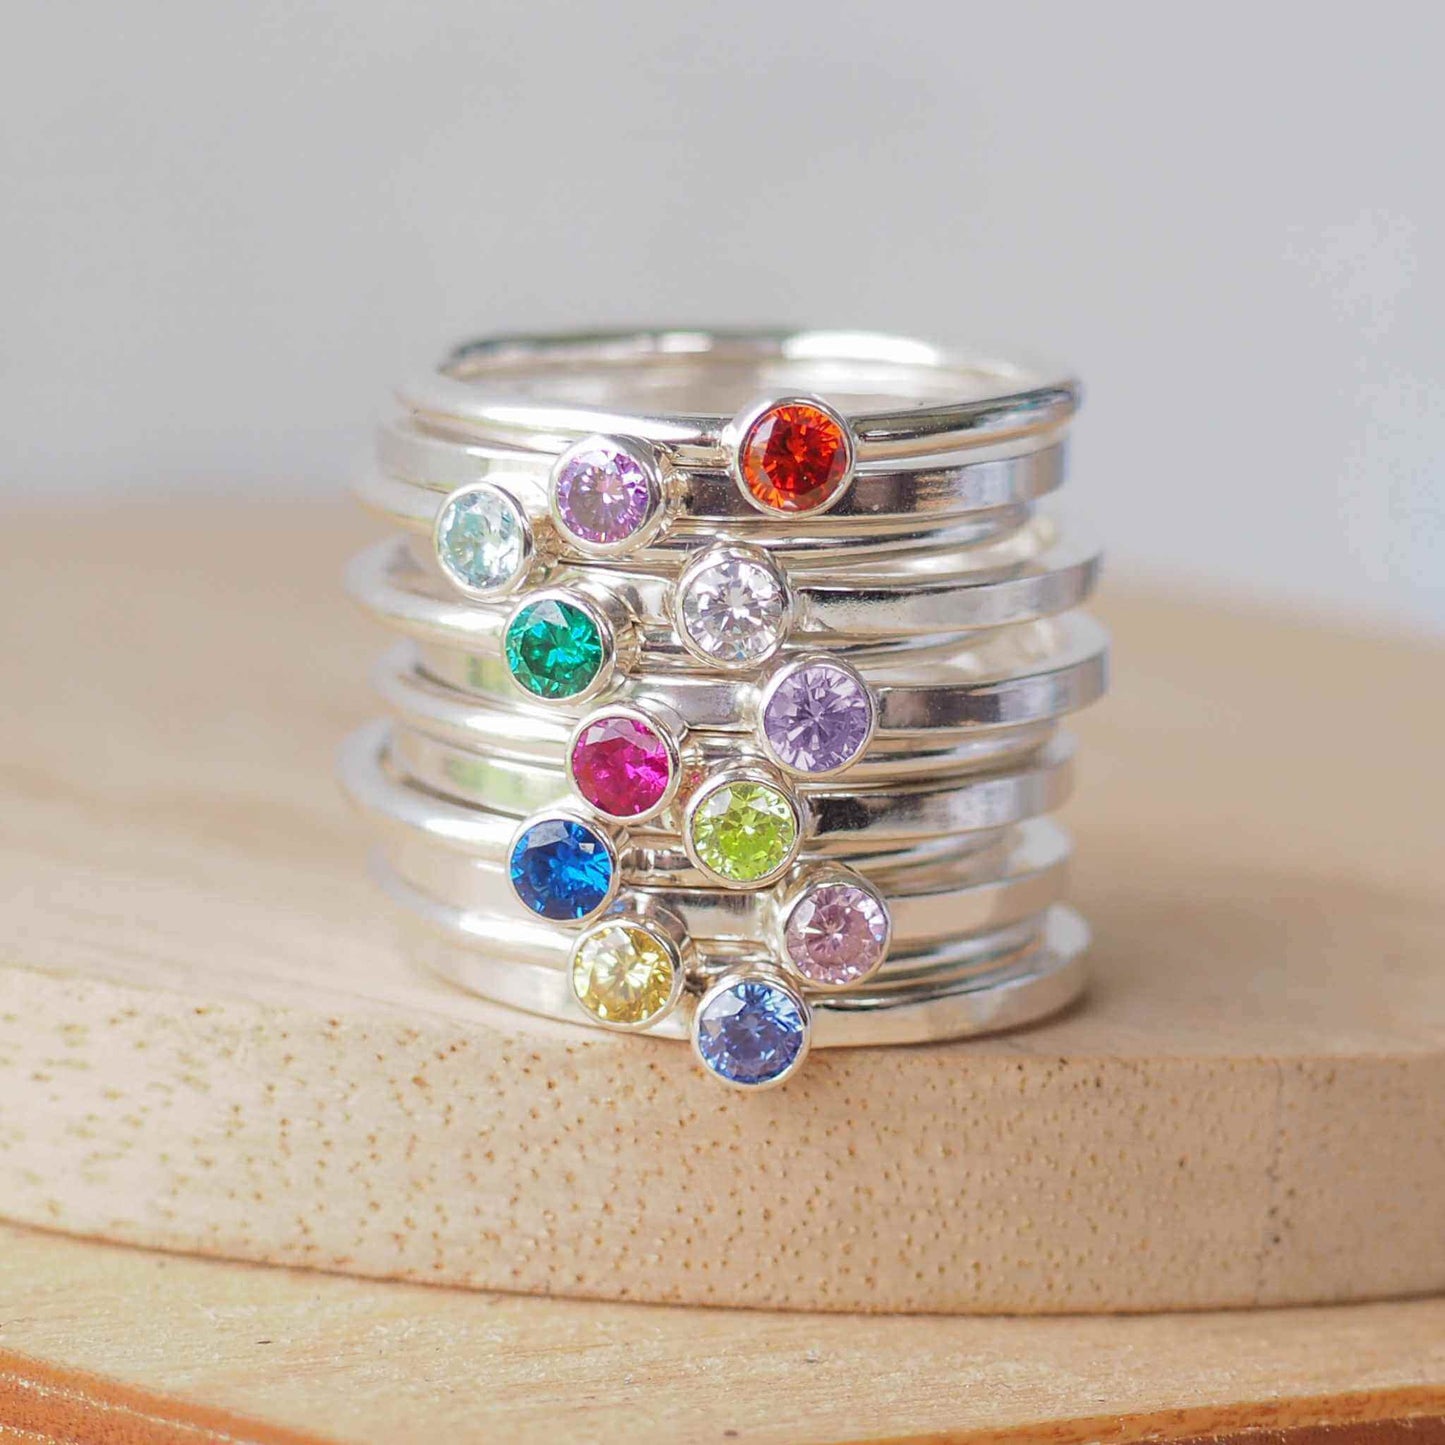 Stack of twelve birthstone rings in Sterling Silver with a round coloured cubic zirconia in 3mm size to mark birthstones for every month. Rainbow bright coloured gems with round or square silver bands to create a modern minimalist gemstone ring. Handmade in Scotland by maram jewellery